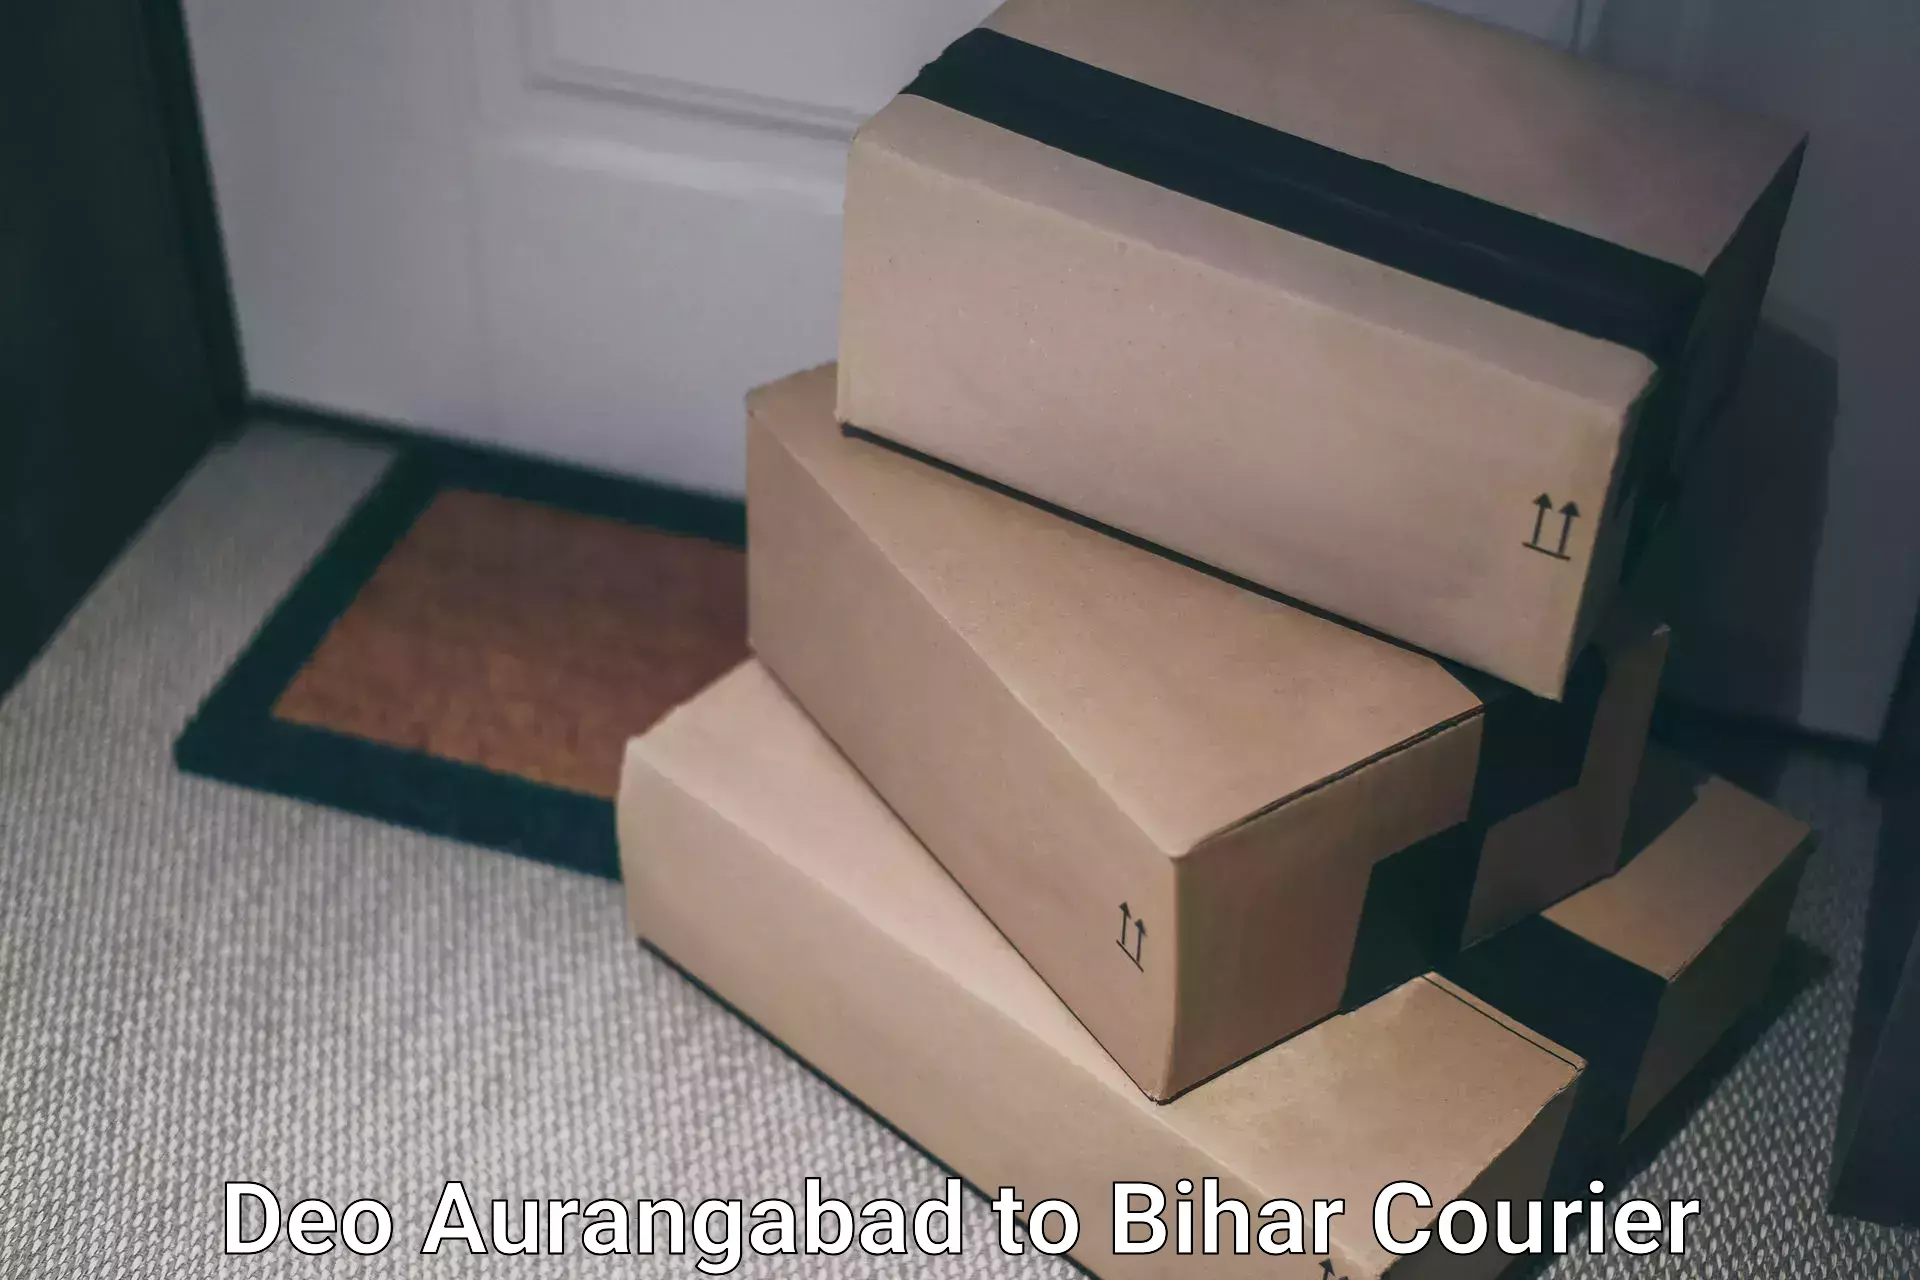 Parcel service for businesses Deo Aurangabad to Jehanabad